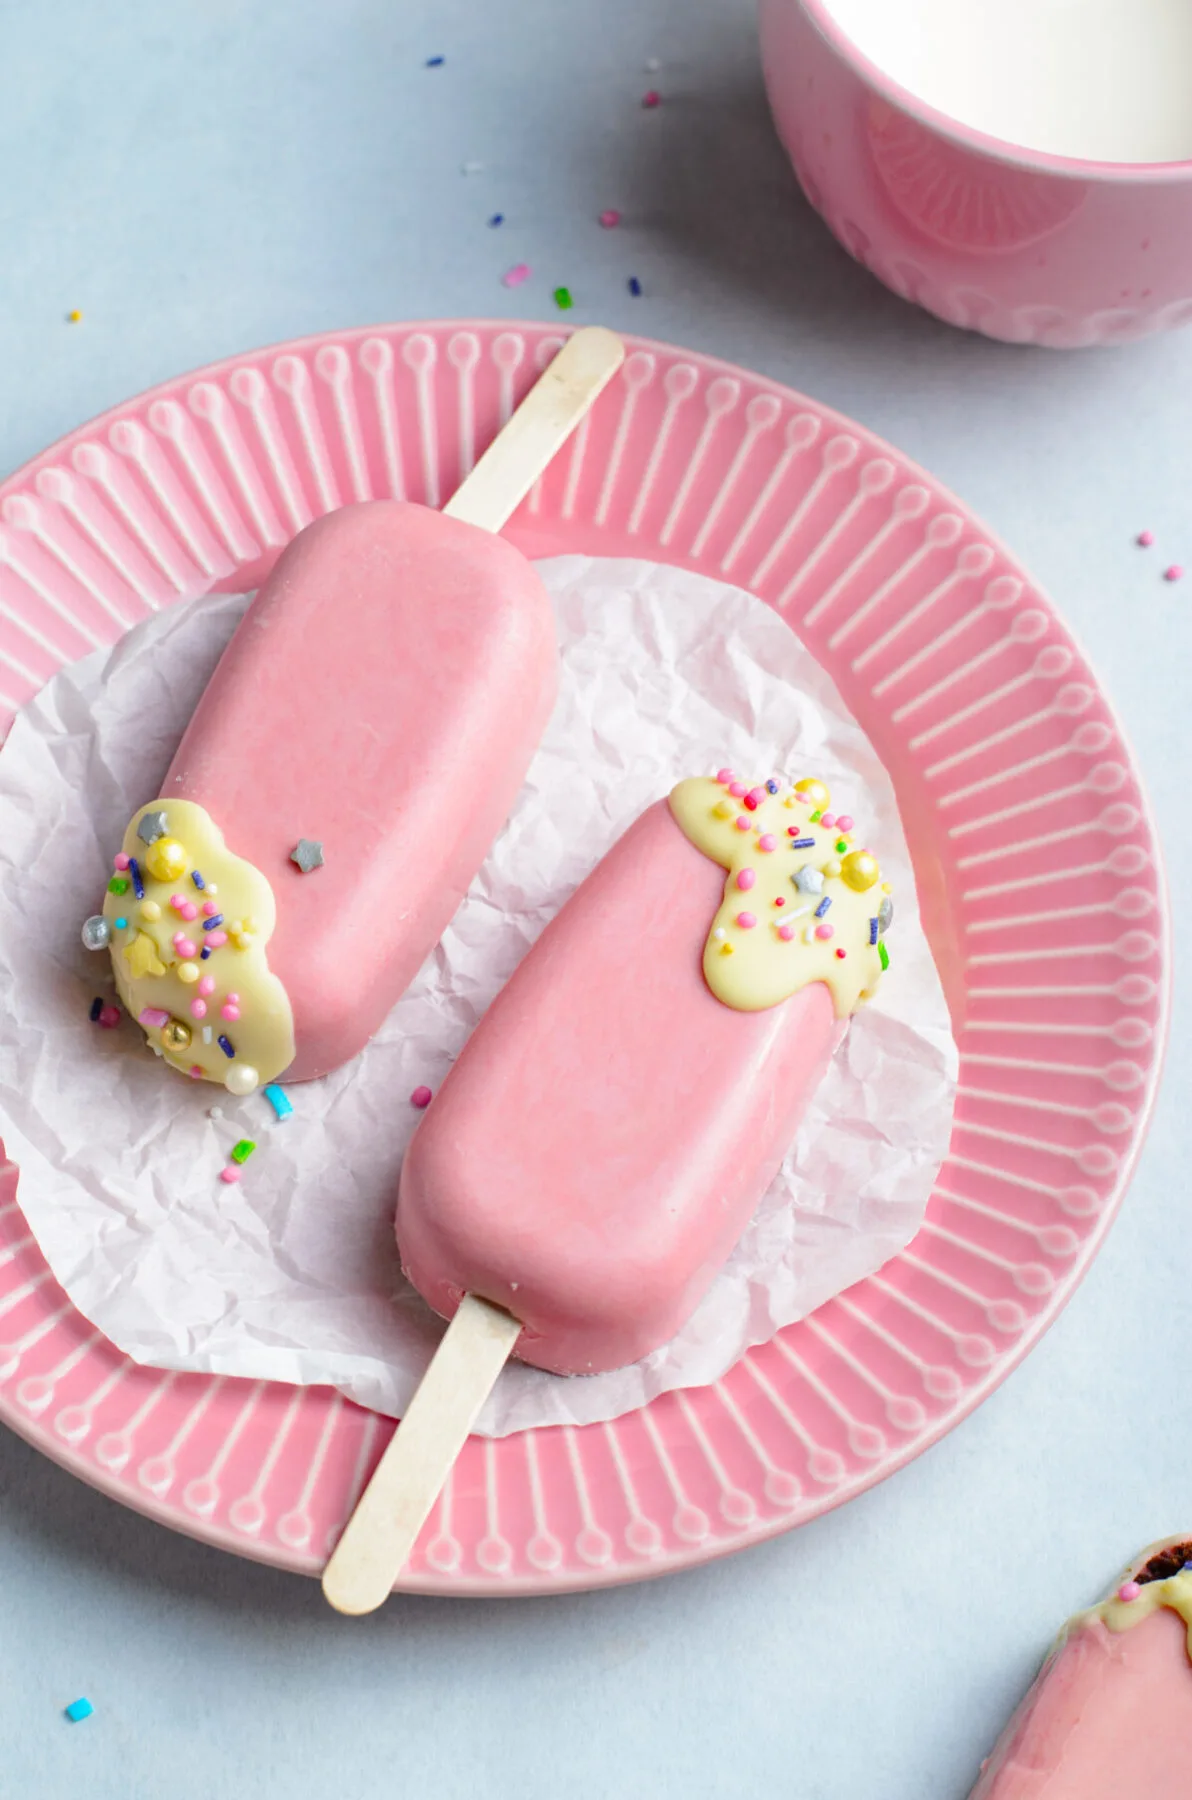 Try this recipe for browniesicles, a delicious twist on cake pops. They're shaped like pink "popsicles" with colourful sprinkles.